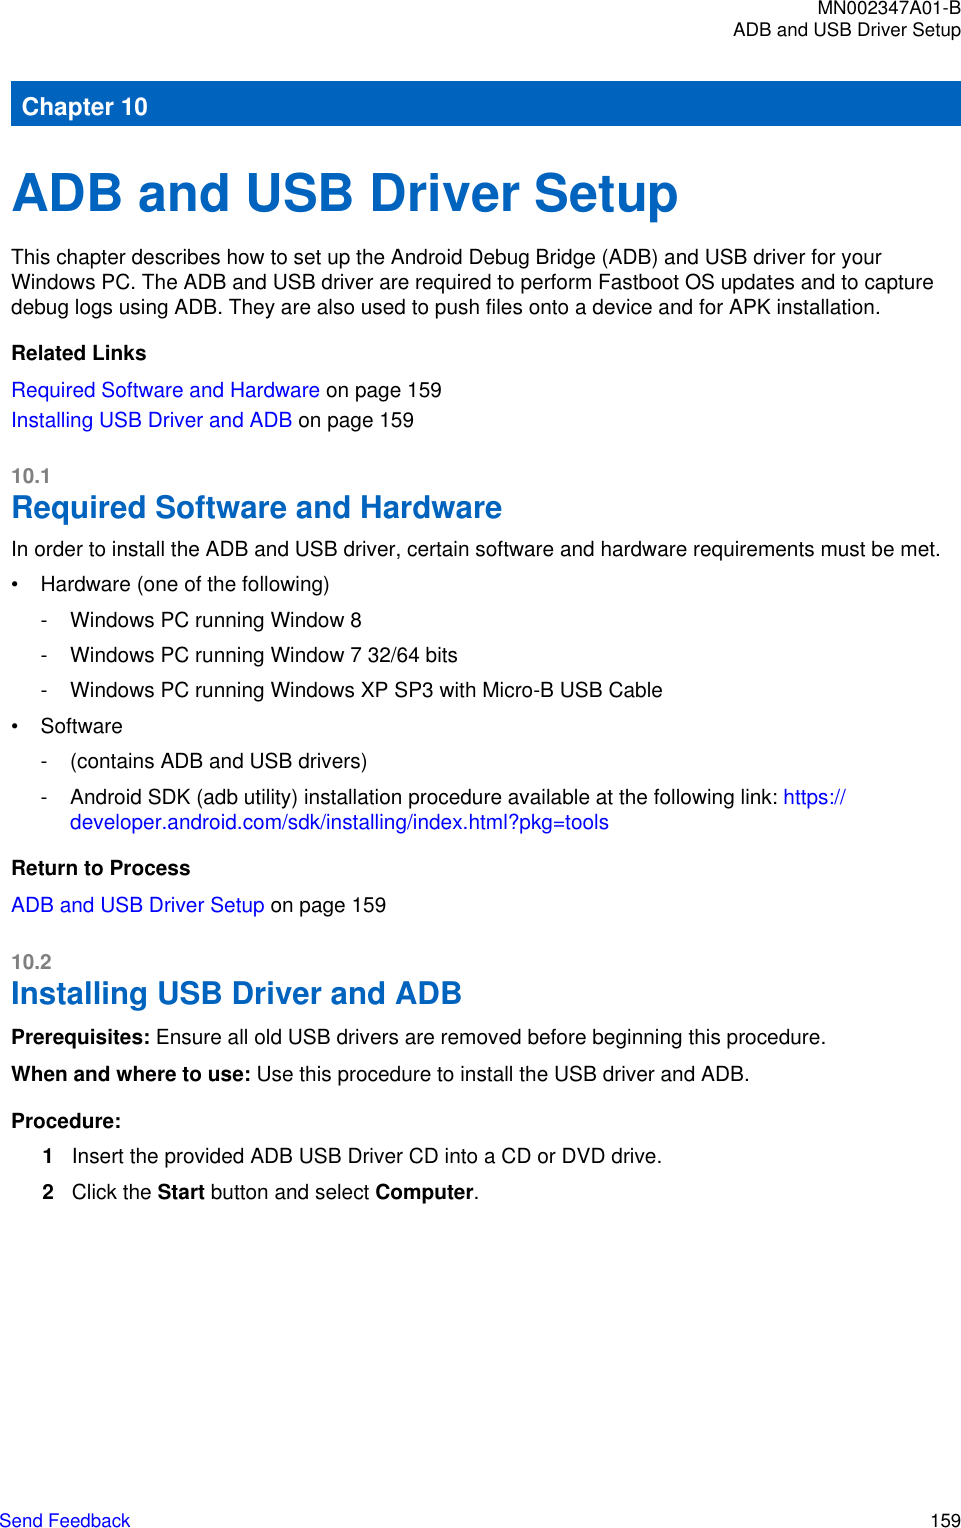 Chapter 10ADB and USB Driver SetupThis chapter describes how to set up the Android Debug Bridge (ADB) and USB driver for yourWindows PC. The ADB and USB driver are required to perform Fastboot OS updates and to capturedebug logs using ADB. They are also used to push files onto a device and for APK installation.Related LinksRequired Software and Hardware on page 159Installing USB Driver and ADB on page 15910.1Required Software and HardwareIn order to install the ADB and USB driver, certain software and hardware requirements must be met.• Hardware (one of the following)- Windows PC running Window 8- Windows PC running Window 7 32/64 bits- Windows PC running Windows XP SP3 with Micro-B USB Cable• Software- (contains ADB and USB drivers)- Android SDK (adb utility) installation procedure available at the following link: https://developer.android.com/sdk/installing/index.html?pkg=toolsReturn to ProcessADB and USB Driver Setup on page 15910.2Installing USB Driver and ADB Prerequisites: Ensure all old USB drivers are removed before beginning this procedure.When and where to use: Use this procedure to install the USB driver and ADB.Procedure:1Insert the provided ADB USB Driver CD into a CD or DVD drive.2Click the Start button and select Computer.MN002347A01-BADB and USB Driver SetupSend Feedback   159